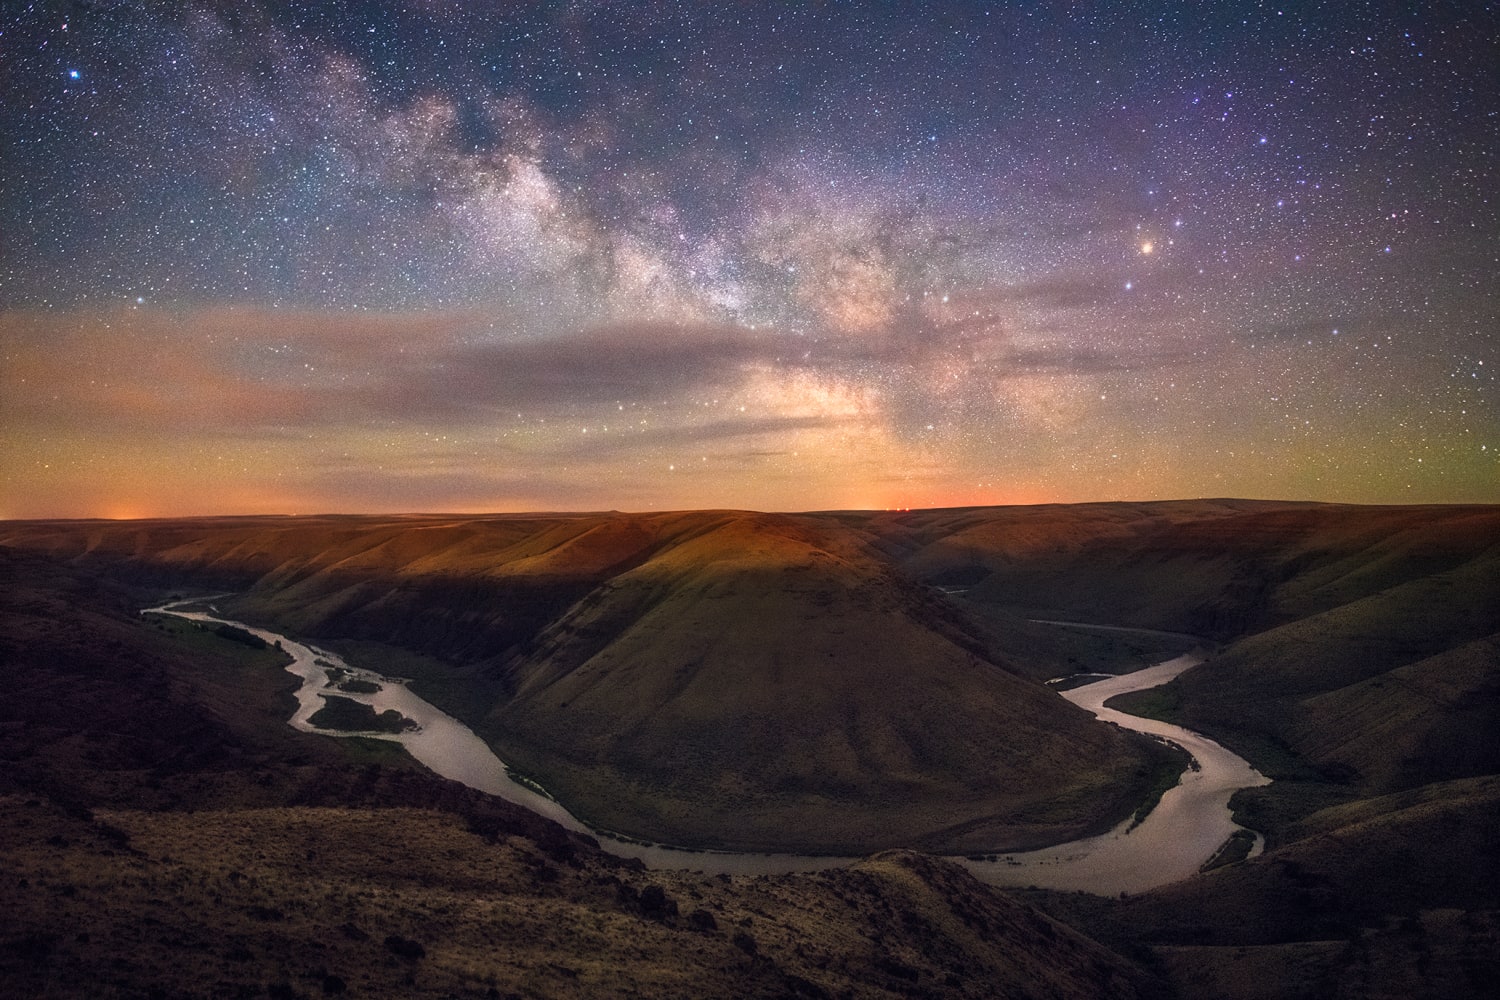 Moonset and the Milky Way over Oregon's High Desert